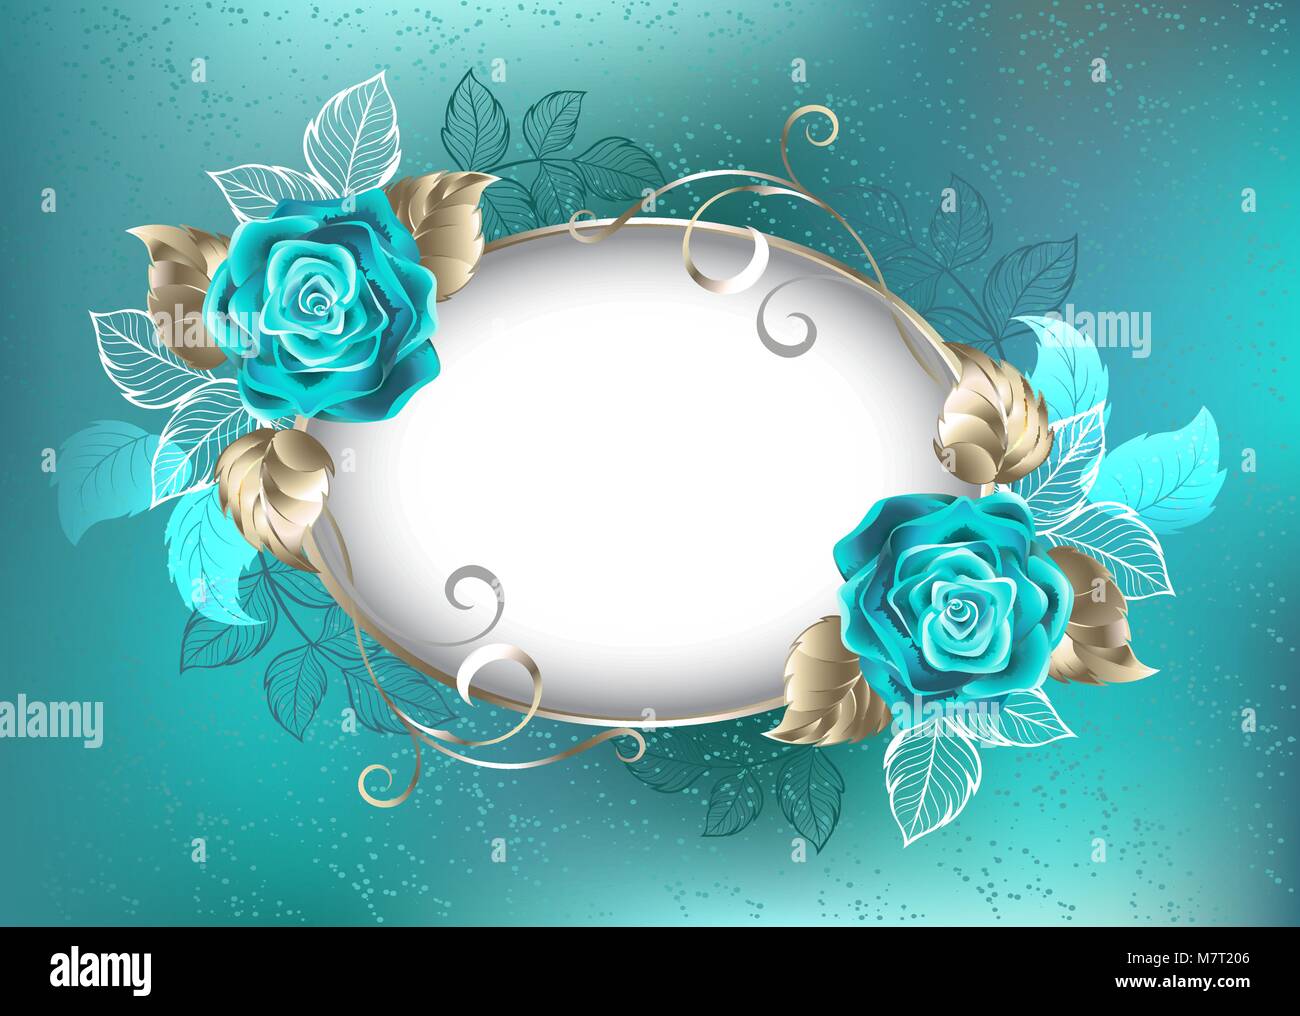 Oval, light banner, decorated with turquoise, roses with leaves of white gold on turquoise background. Blue Tiffany. Fashionable color. Turquoise rose Stock Vector